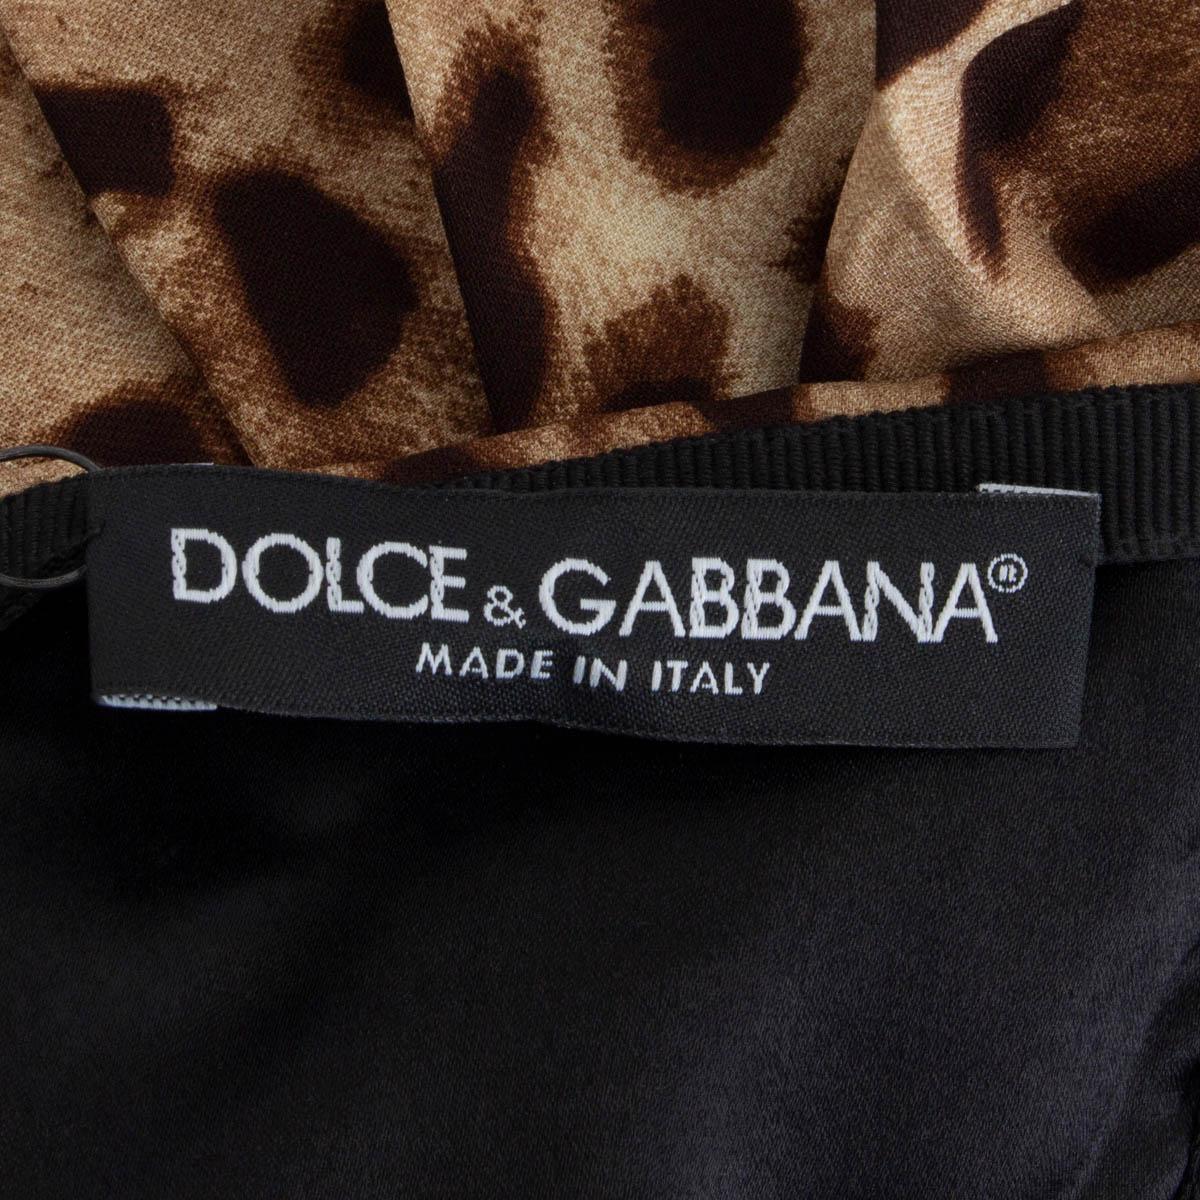 DOLCE & GABBANA black & beige LEOPARD & LACE BOW GOWN MAXI Dress 44 L In Excellent Condition For Sale In Zürich, CH